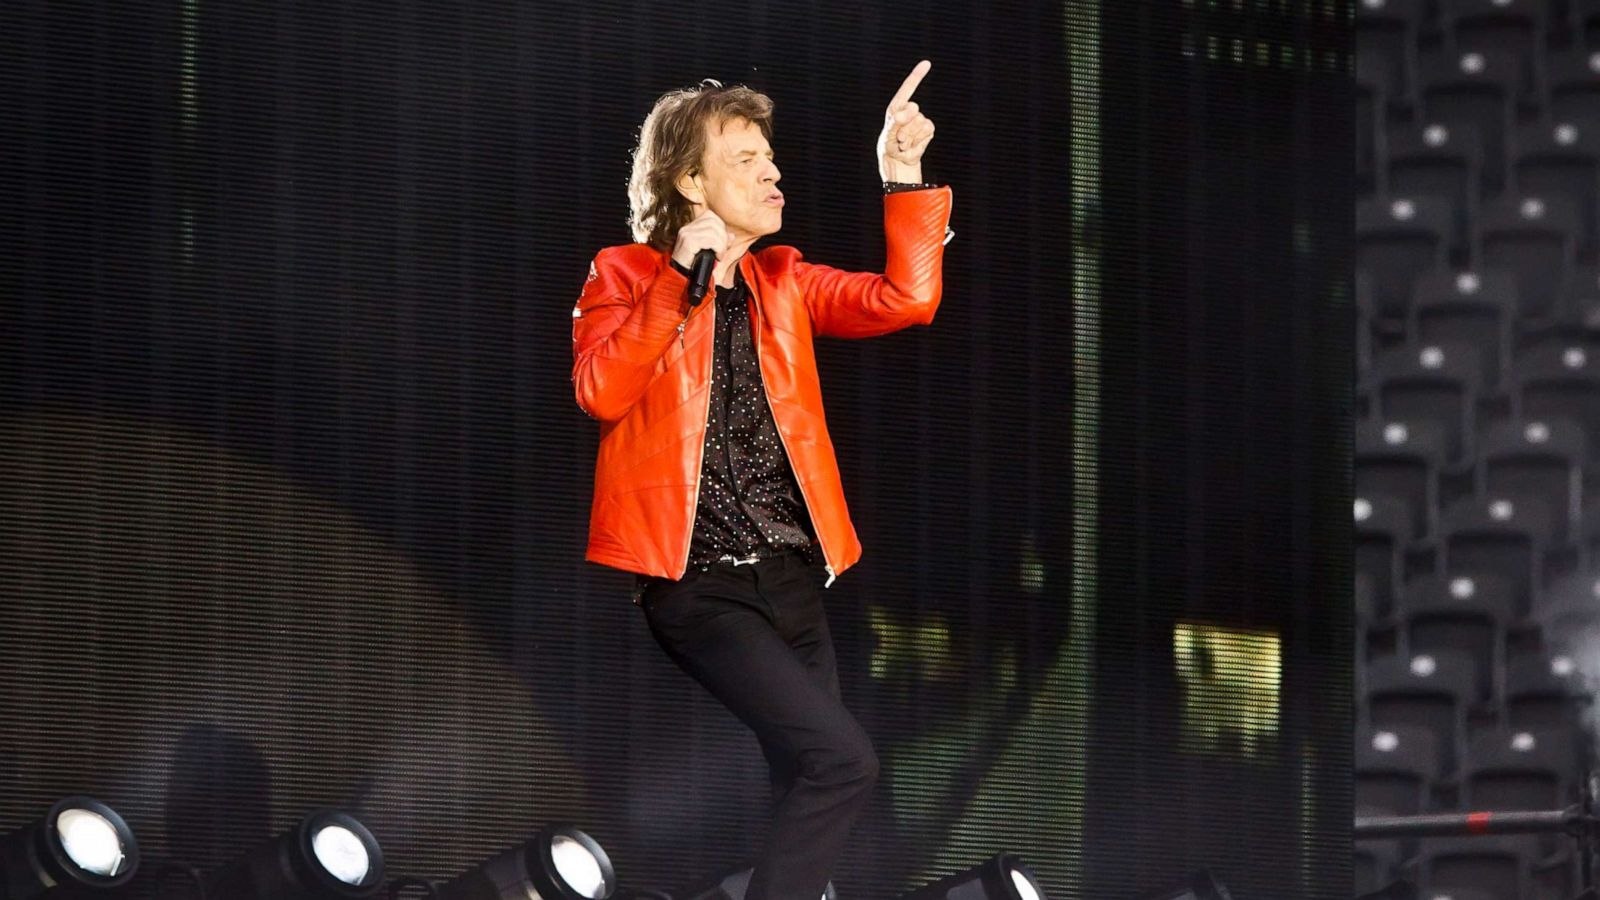 PHOTO: Mick Jagger of The Rolling Stones performs live on stage during a concert, June 22, 2018, in Berlin.